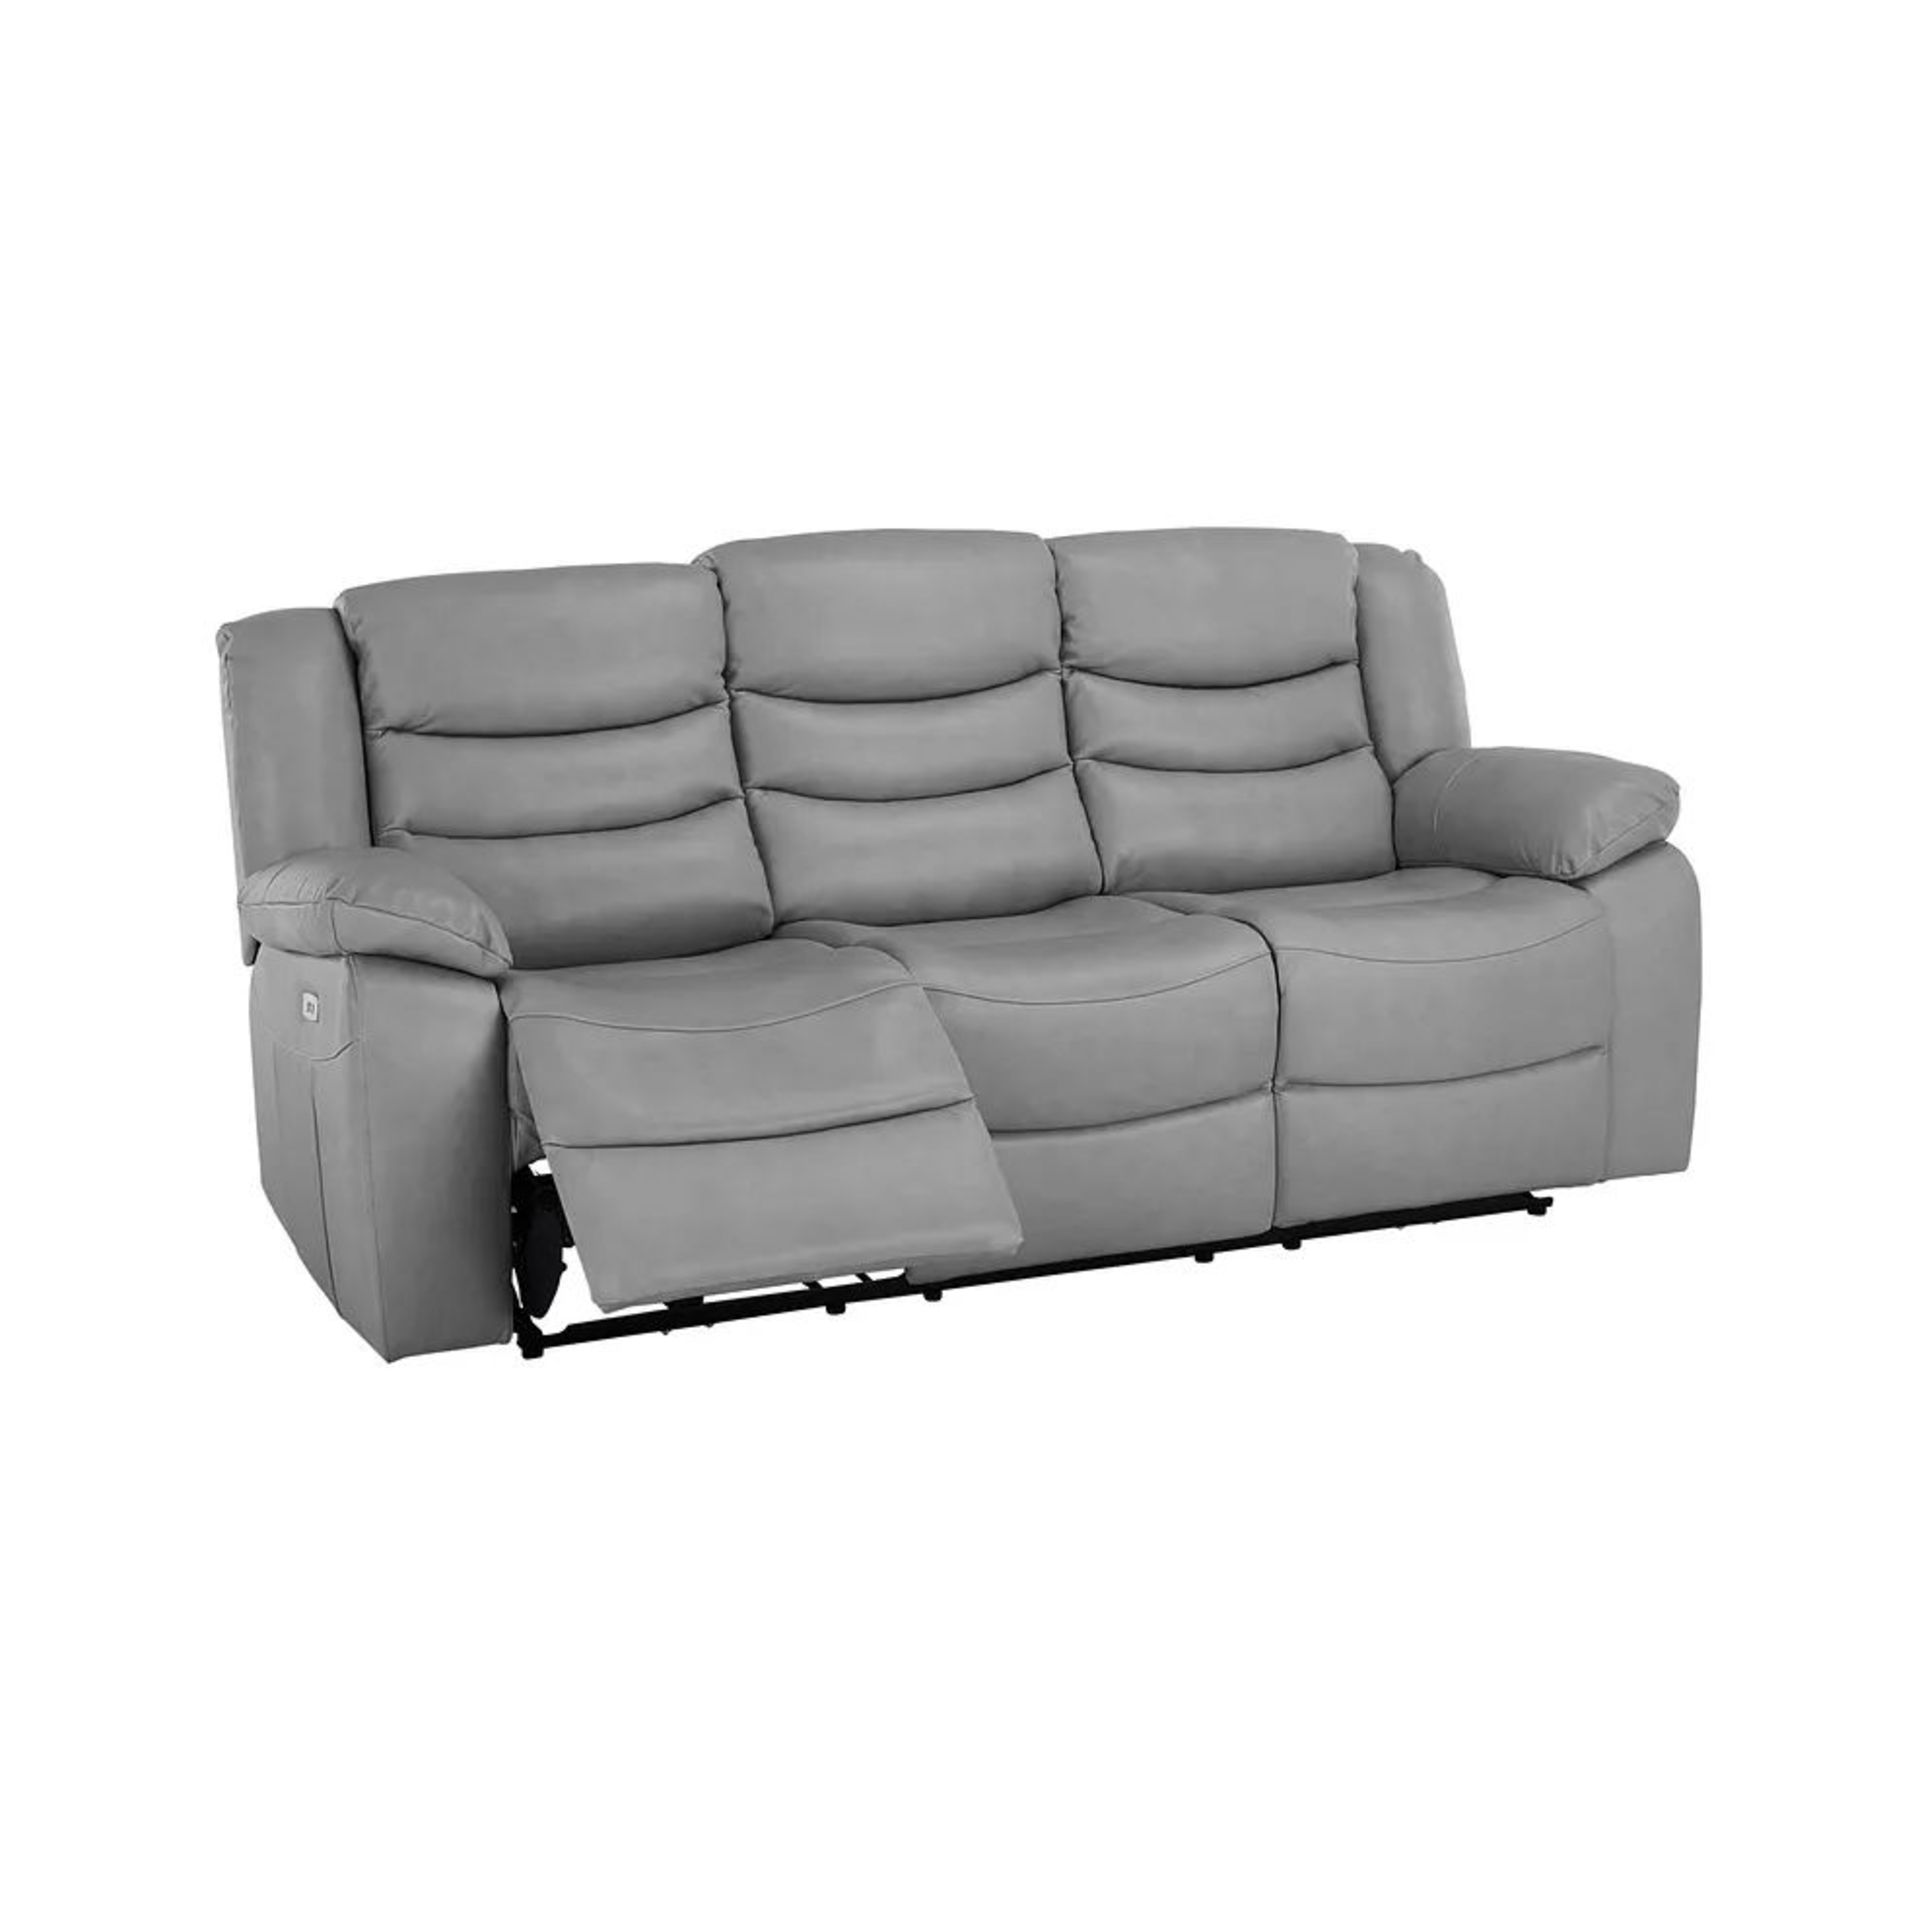 BRAND NEW MARLOW 3 Seater Electric Recliner Sofa - LIGHT GREY LEATHER. RRP £1849. Our Marlow leather - Image 3 of 11